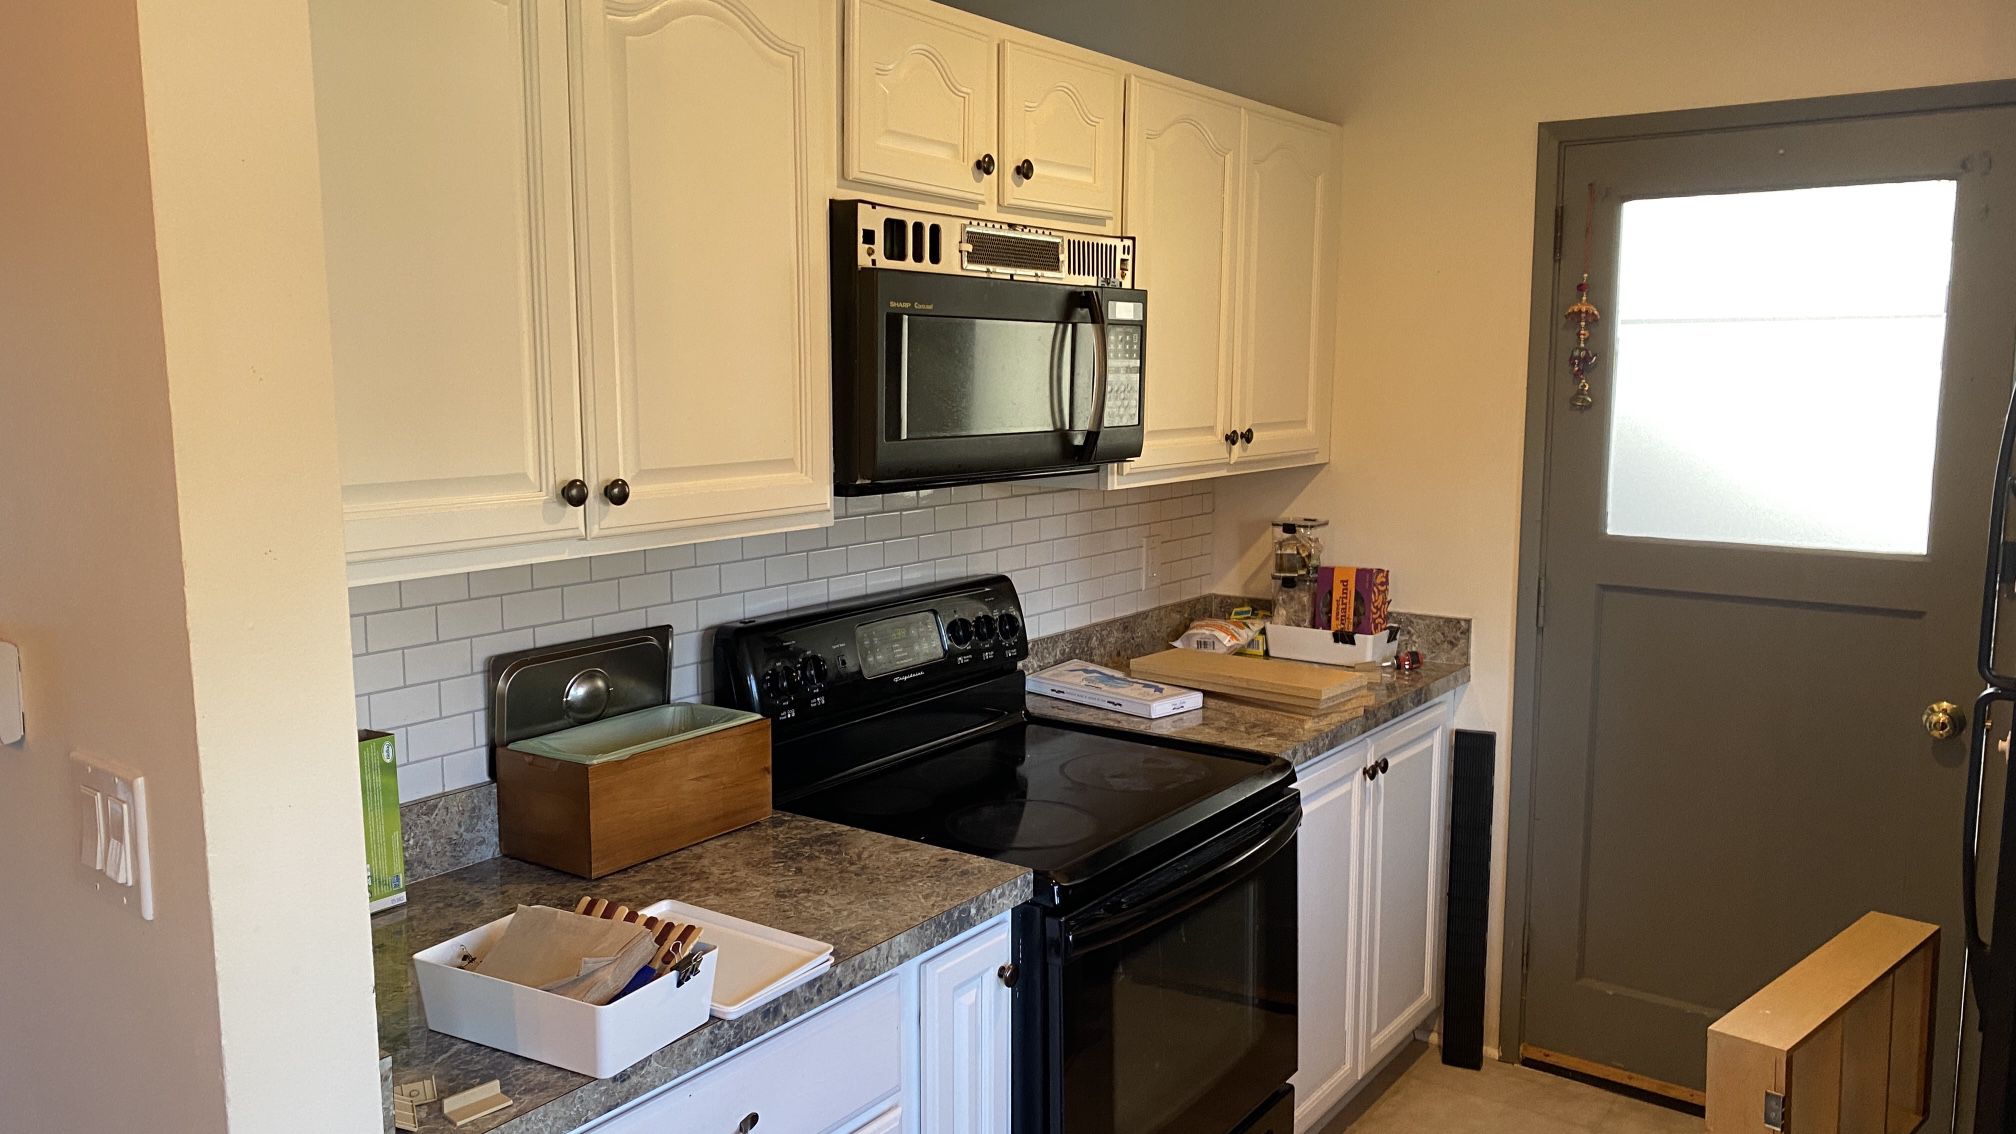 Free Electric Stove, Microwave Oven, Dishwasher